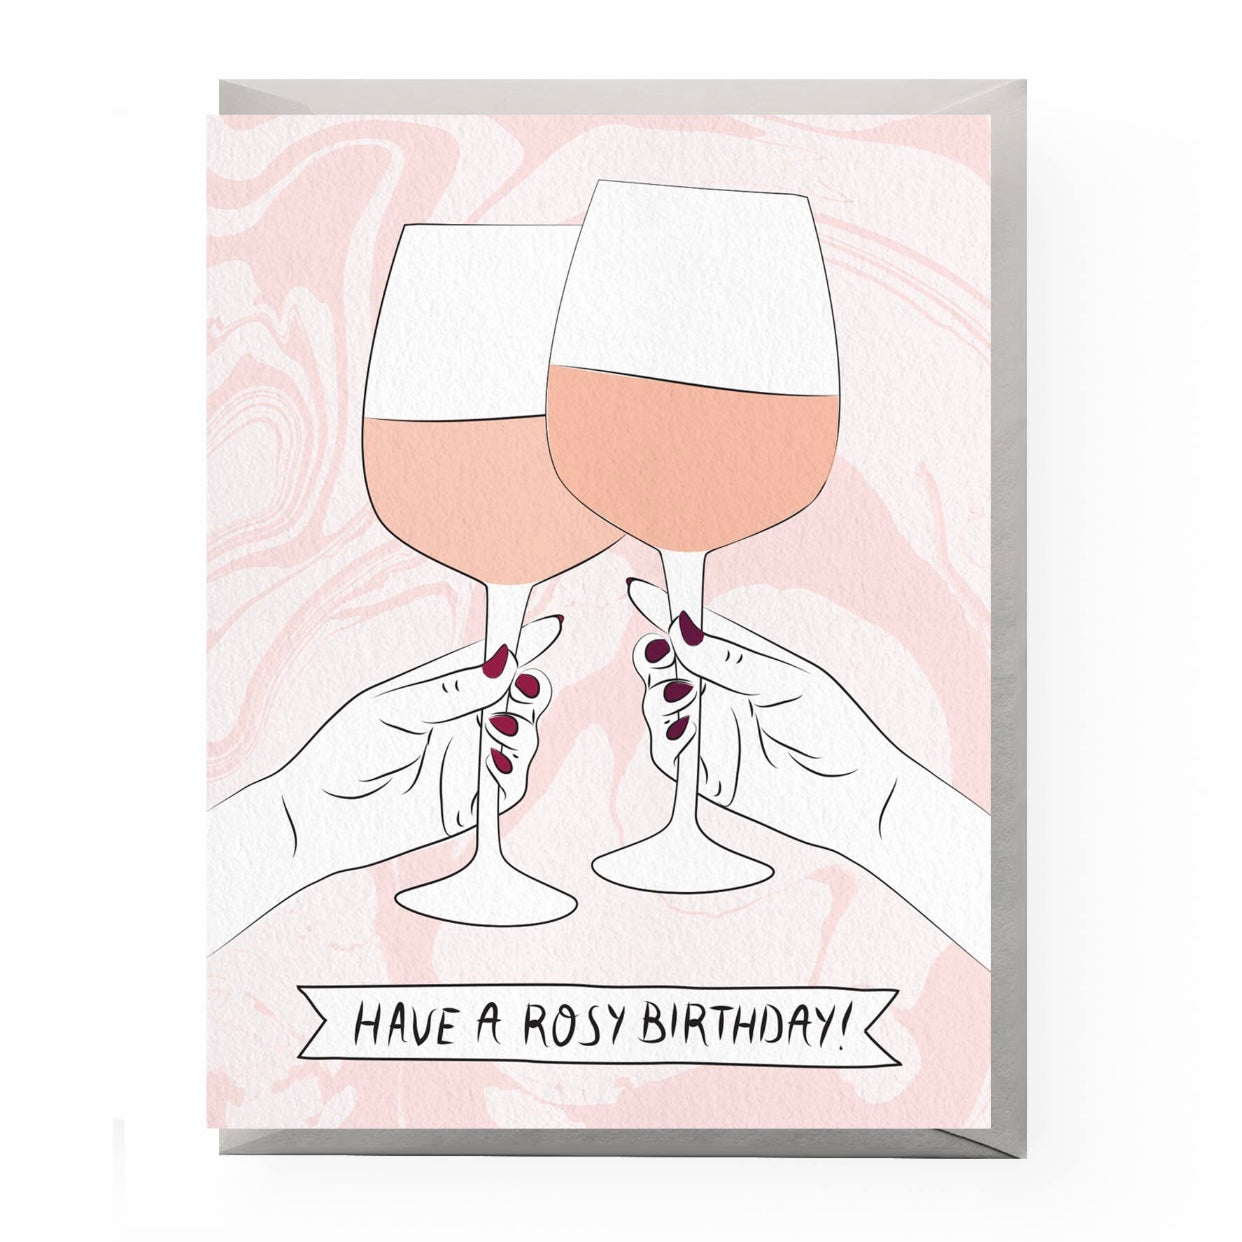 Have a Rosy birthday greeting card